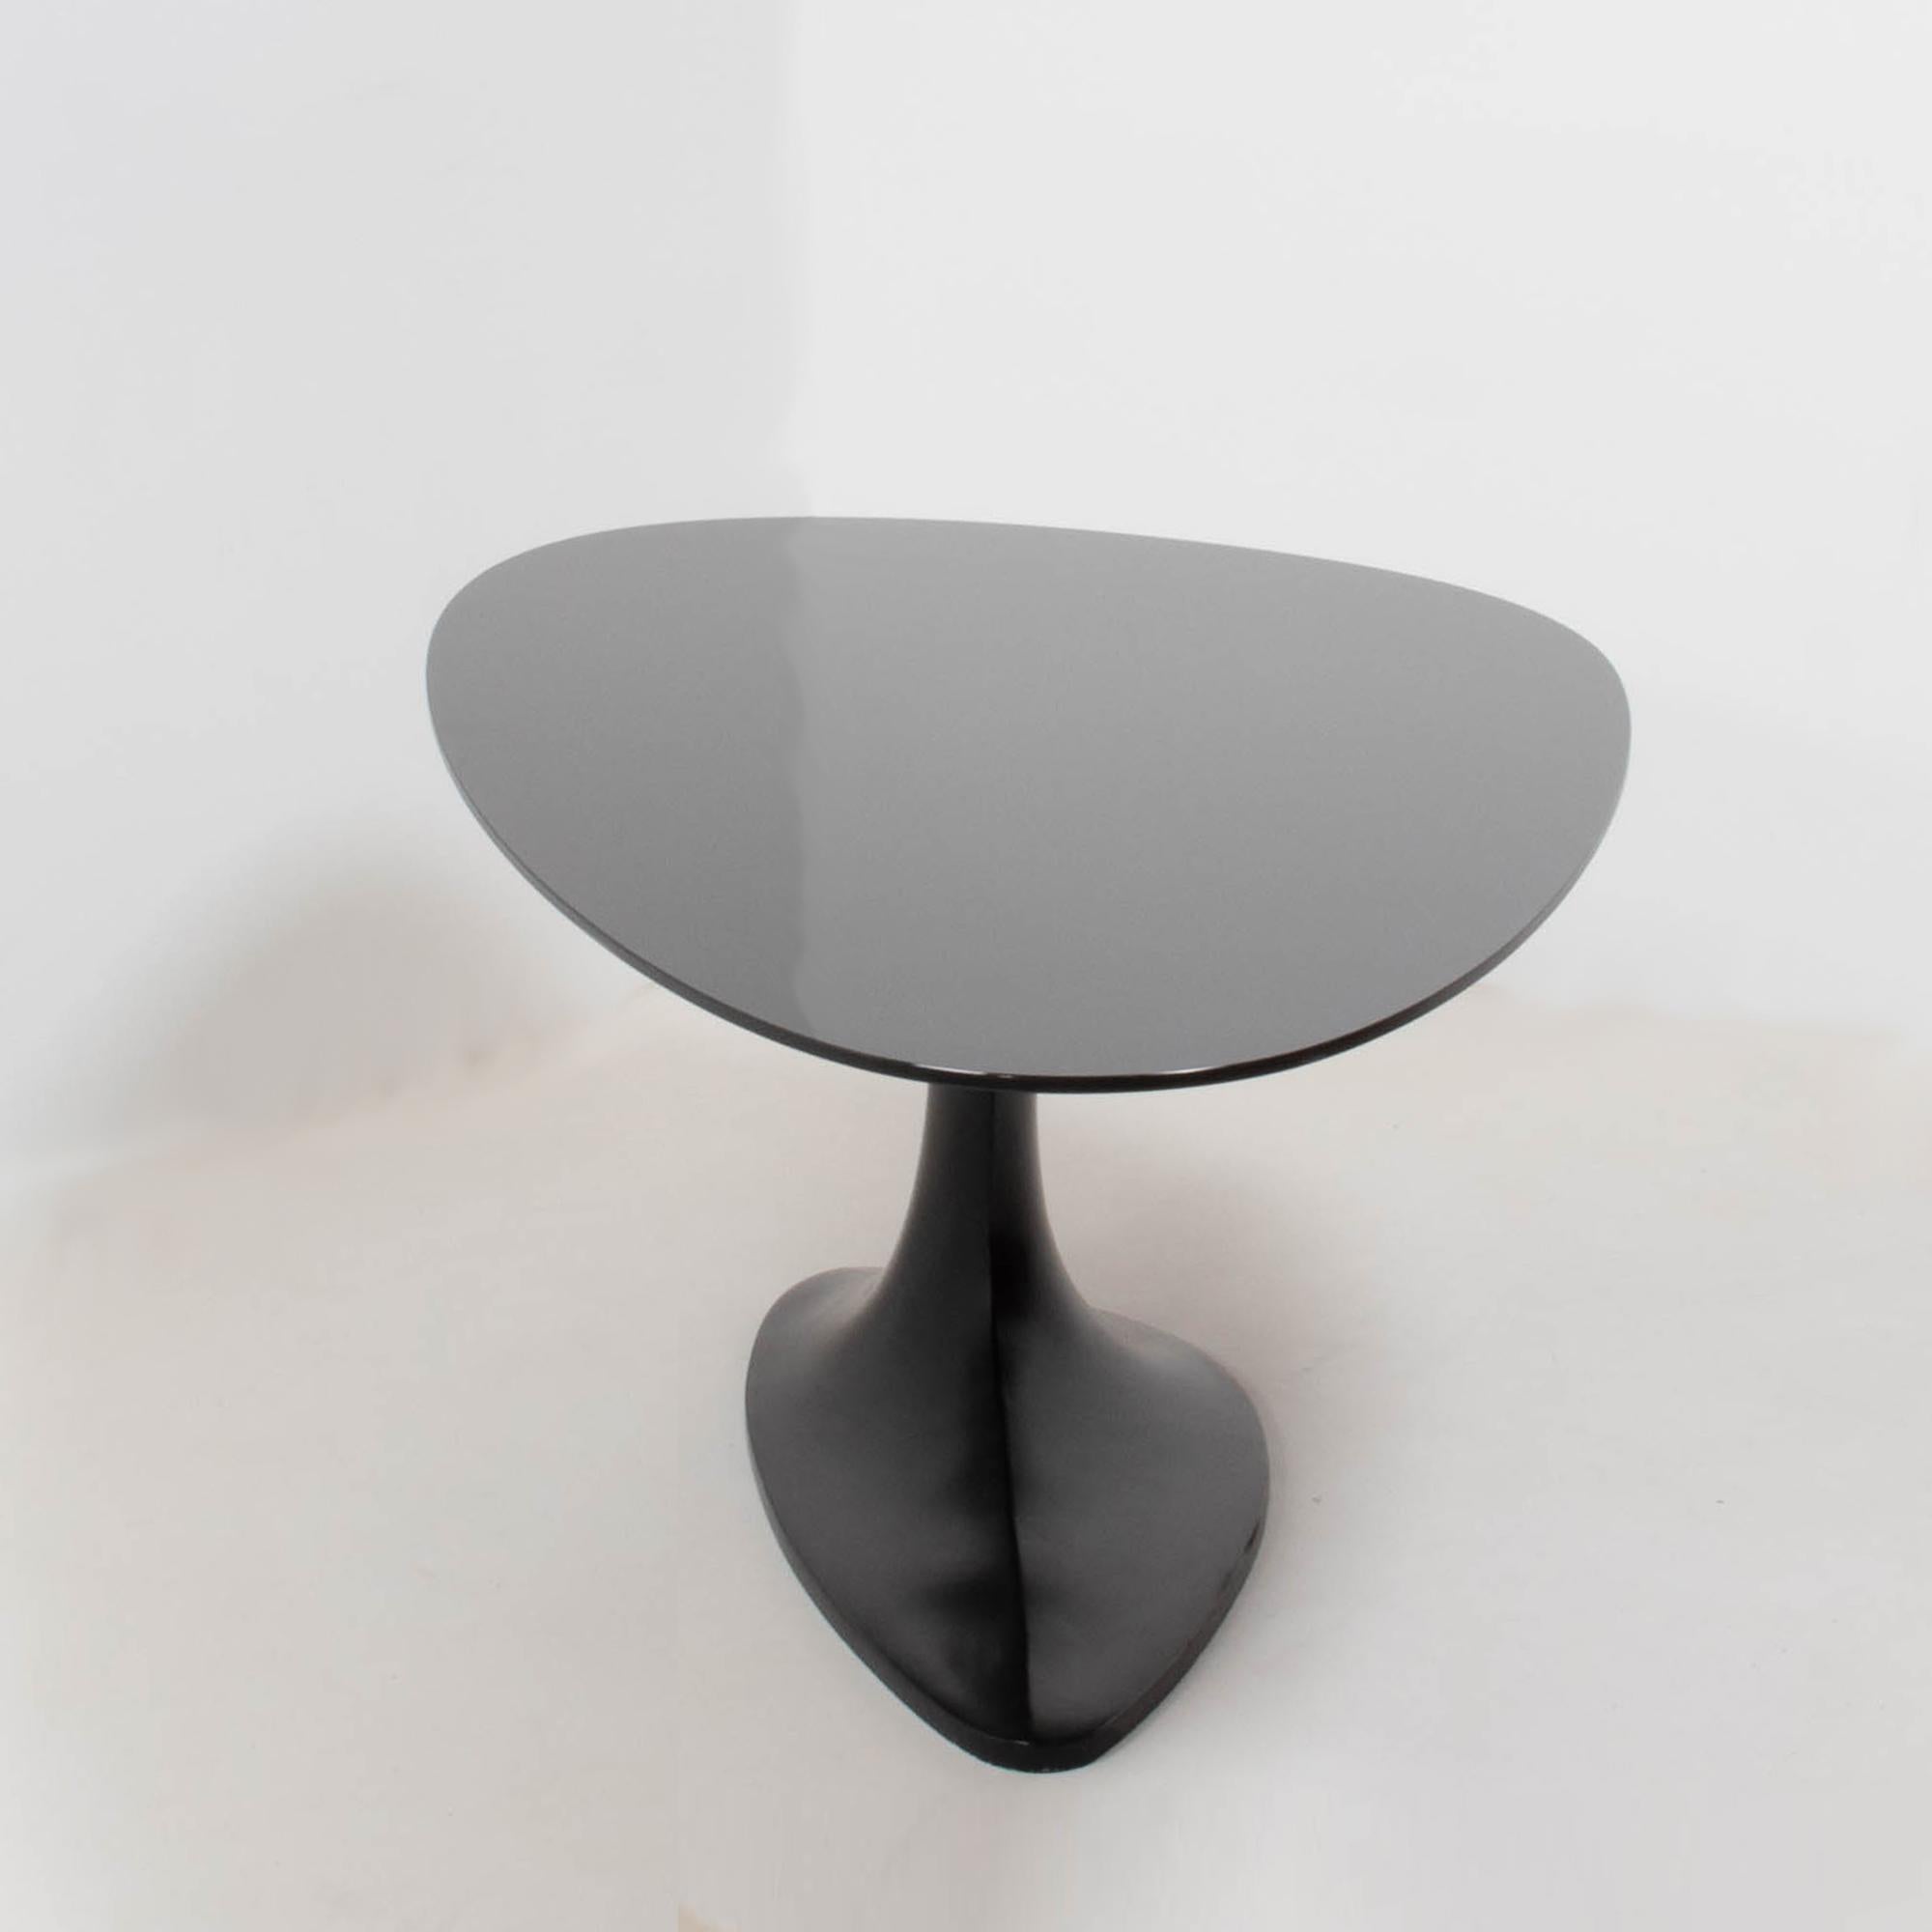 Contemporary Roche Bobois 'Speed Up' Black Dining Table by Sacha Lakic, 2005